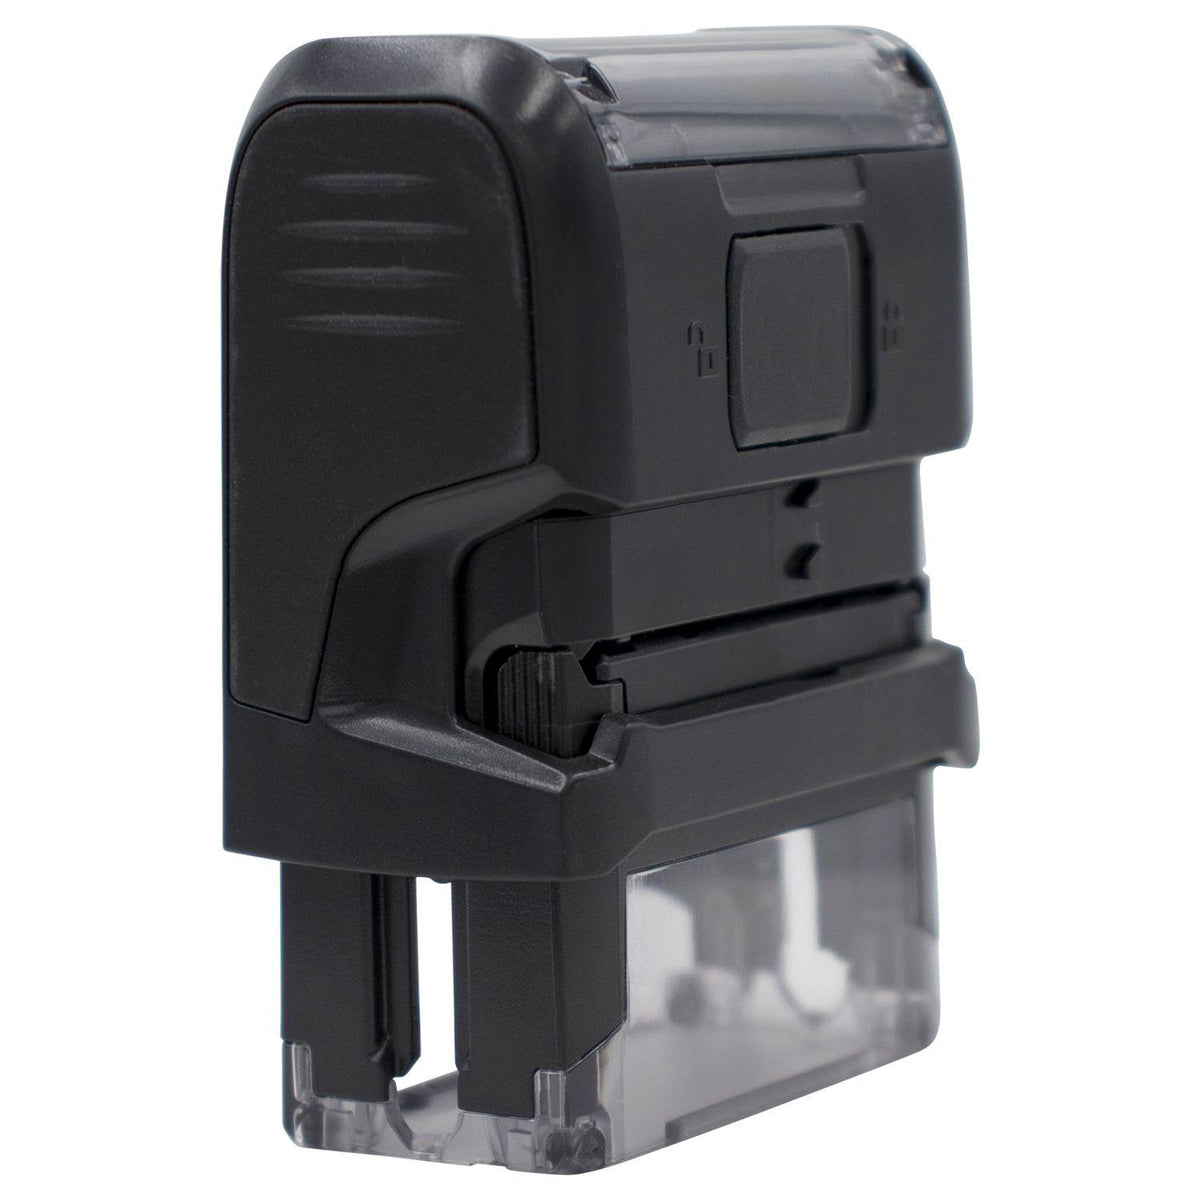 Large Self-Inking Bold Shred Stamp Back View